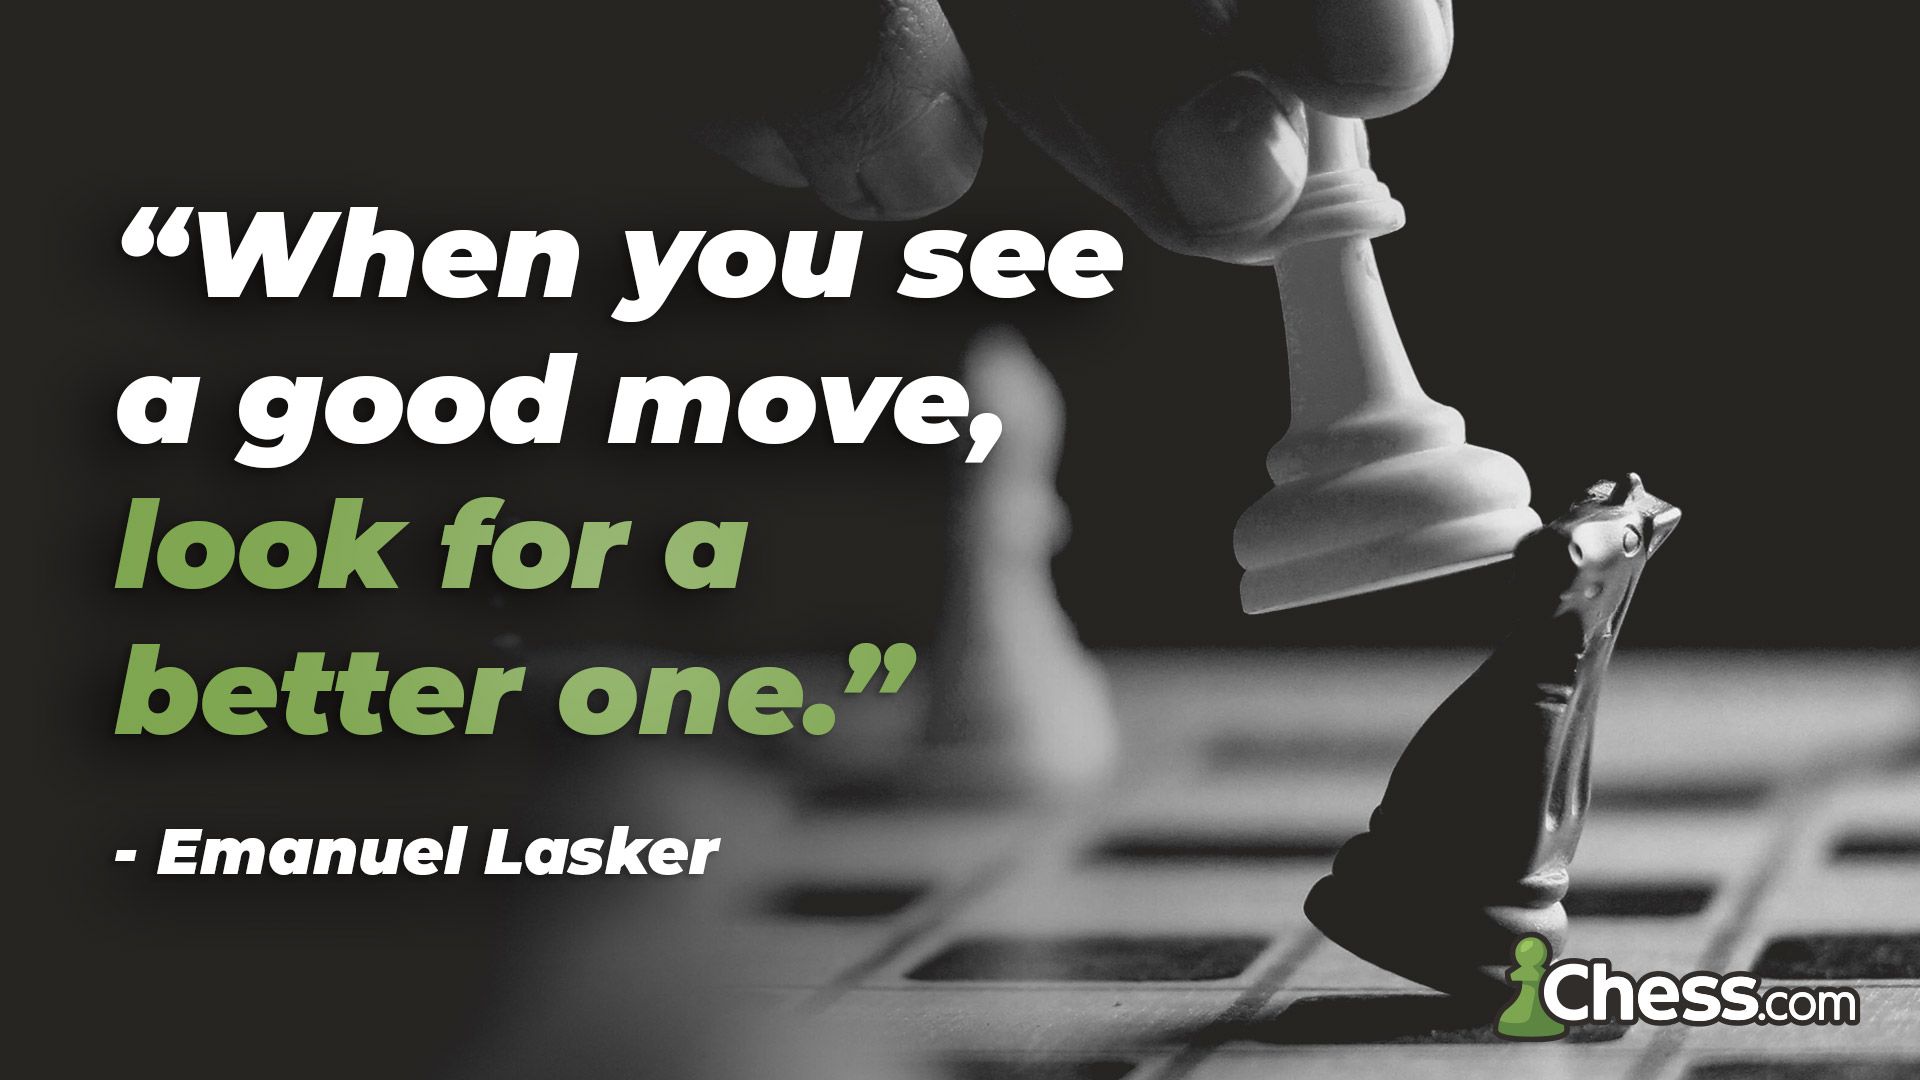 Chess Quotes You May Not Have Heard Before 